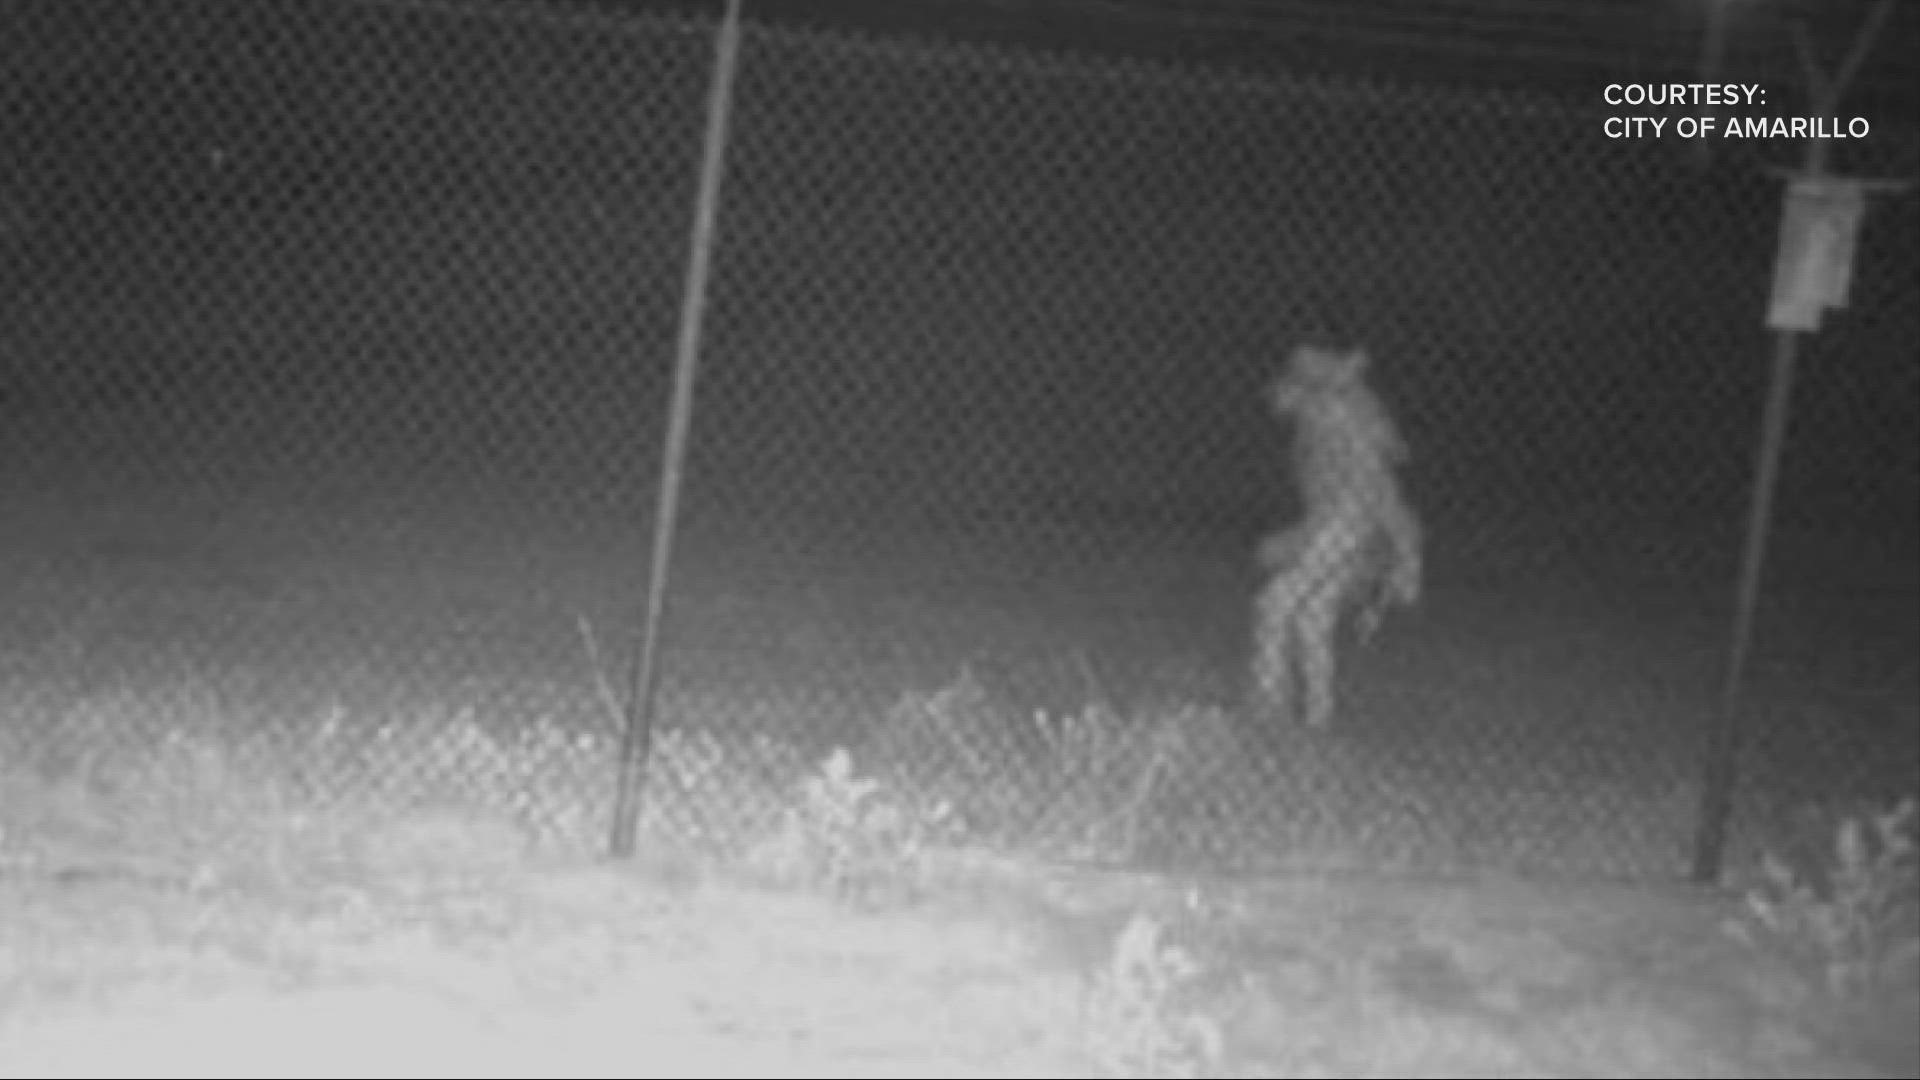 The City of Amarillo took to Facebook to ask if anyone could identify the creature in the "strange image."